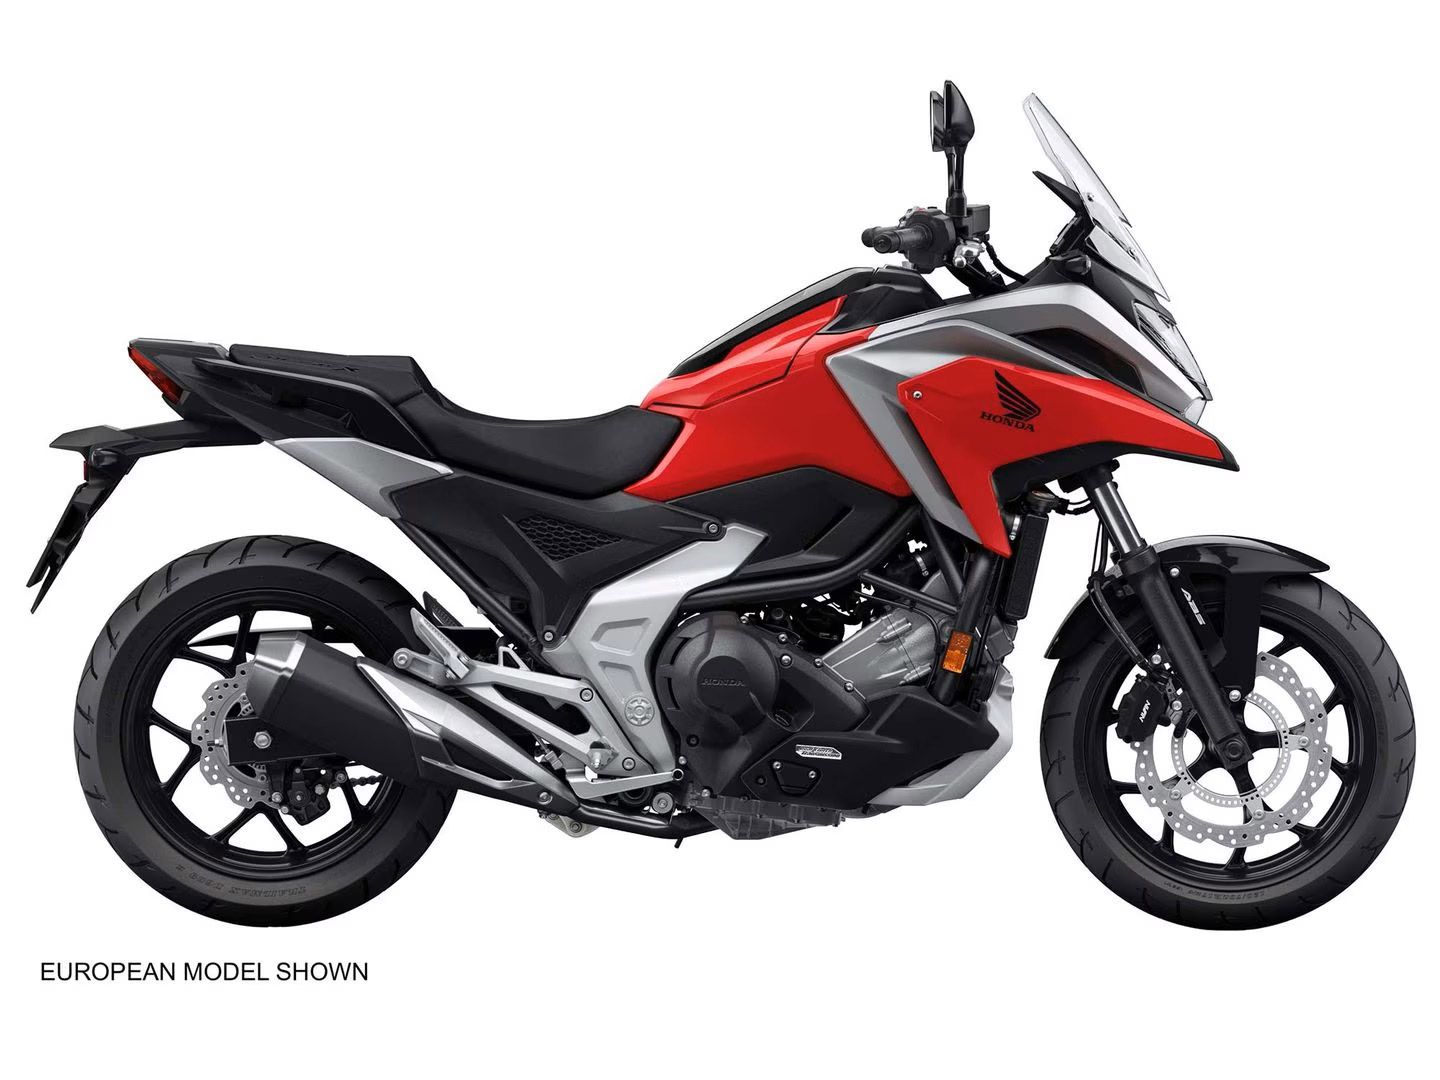 Practical to a fault, Honda’s NC750X is well equipped for either urban or longer-haul commutes thanks to handy amenities and excellent fuel efficiency.